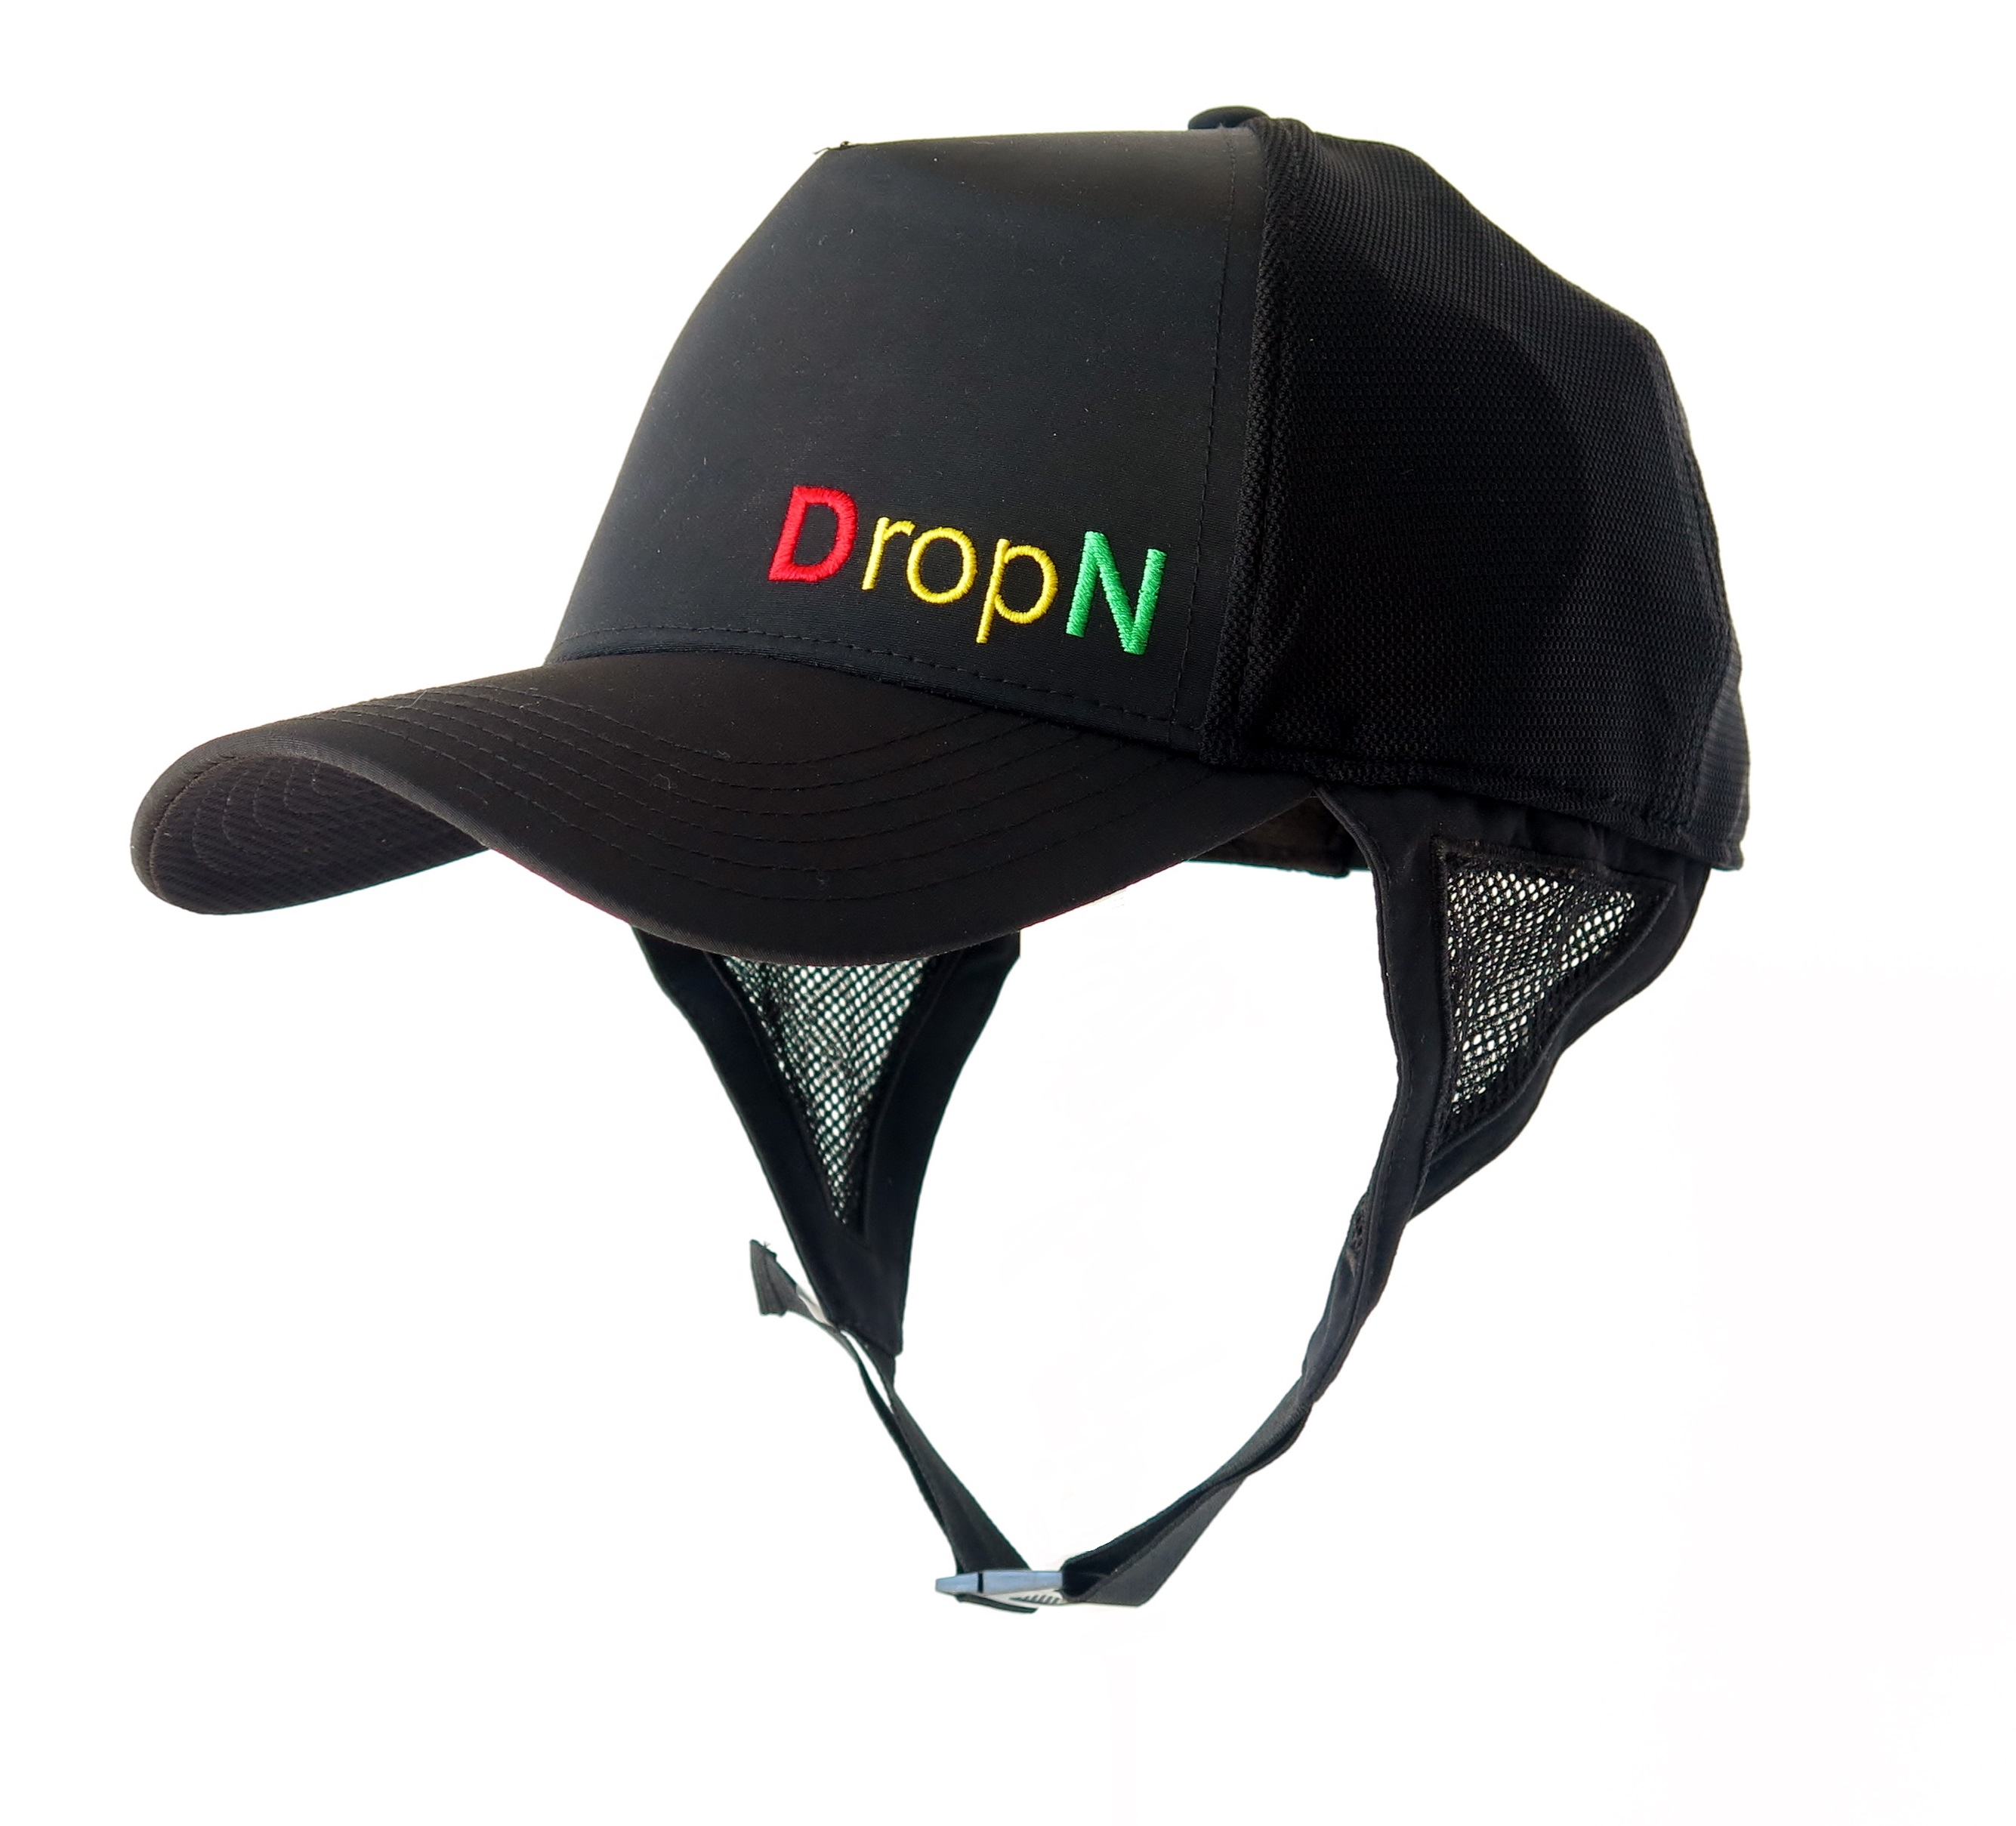 DropN - Surf Hat with and Gear - Strap Surf DropN™ Apparel Logo Surf - Rasta Chin